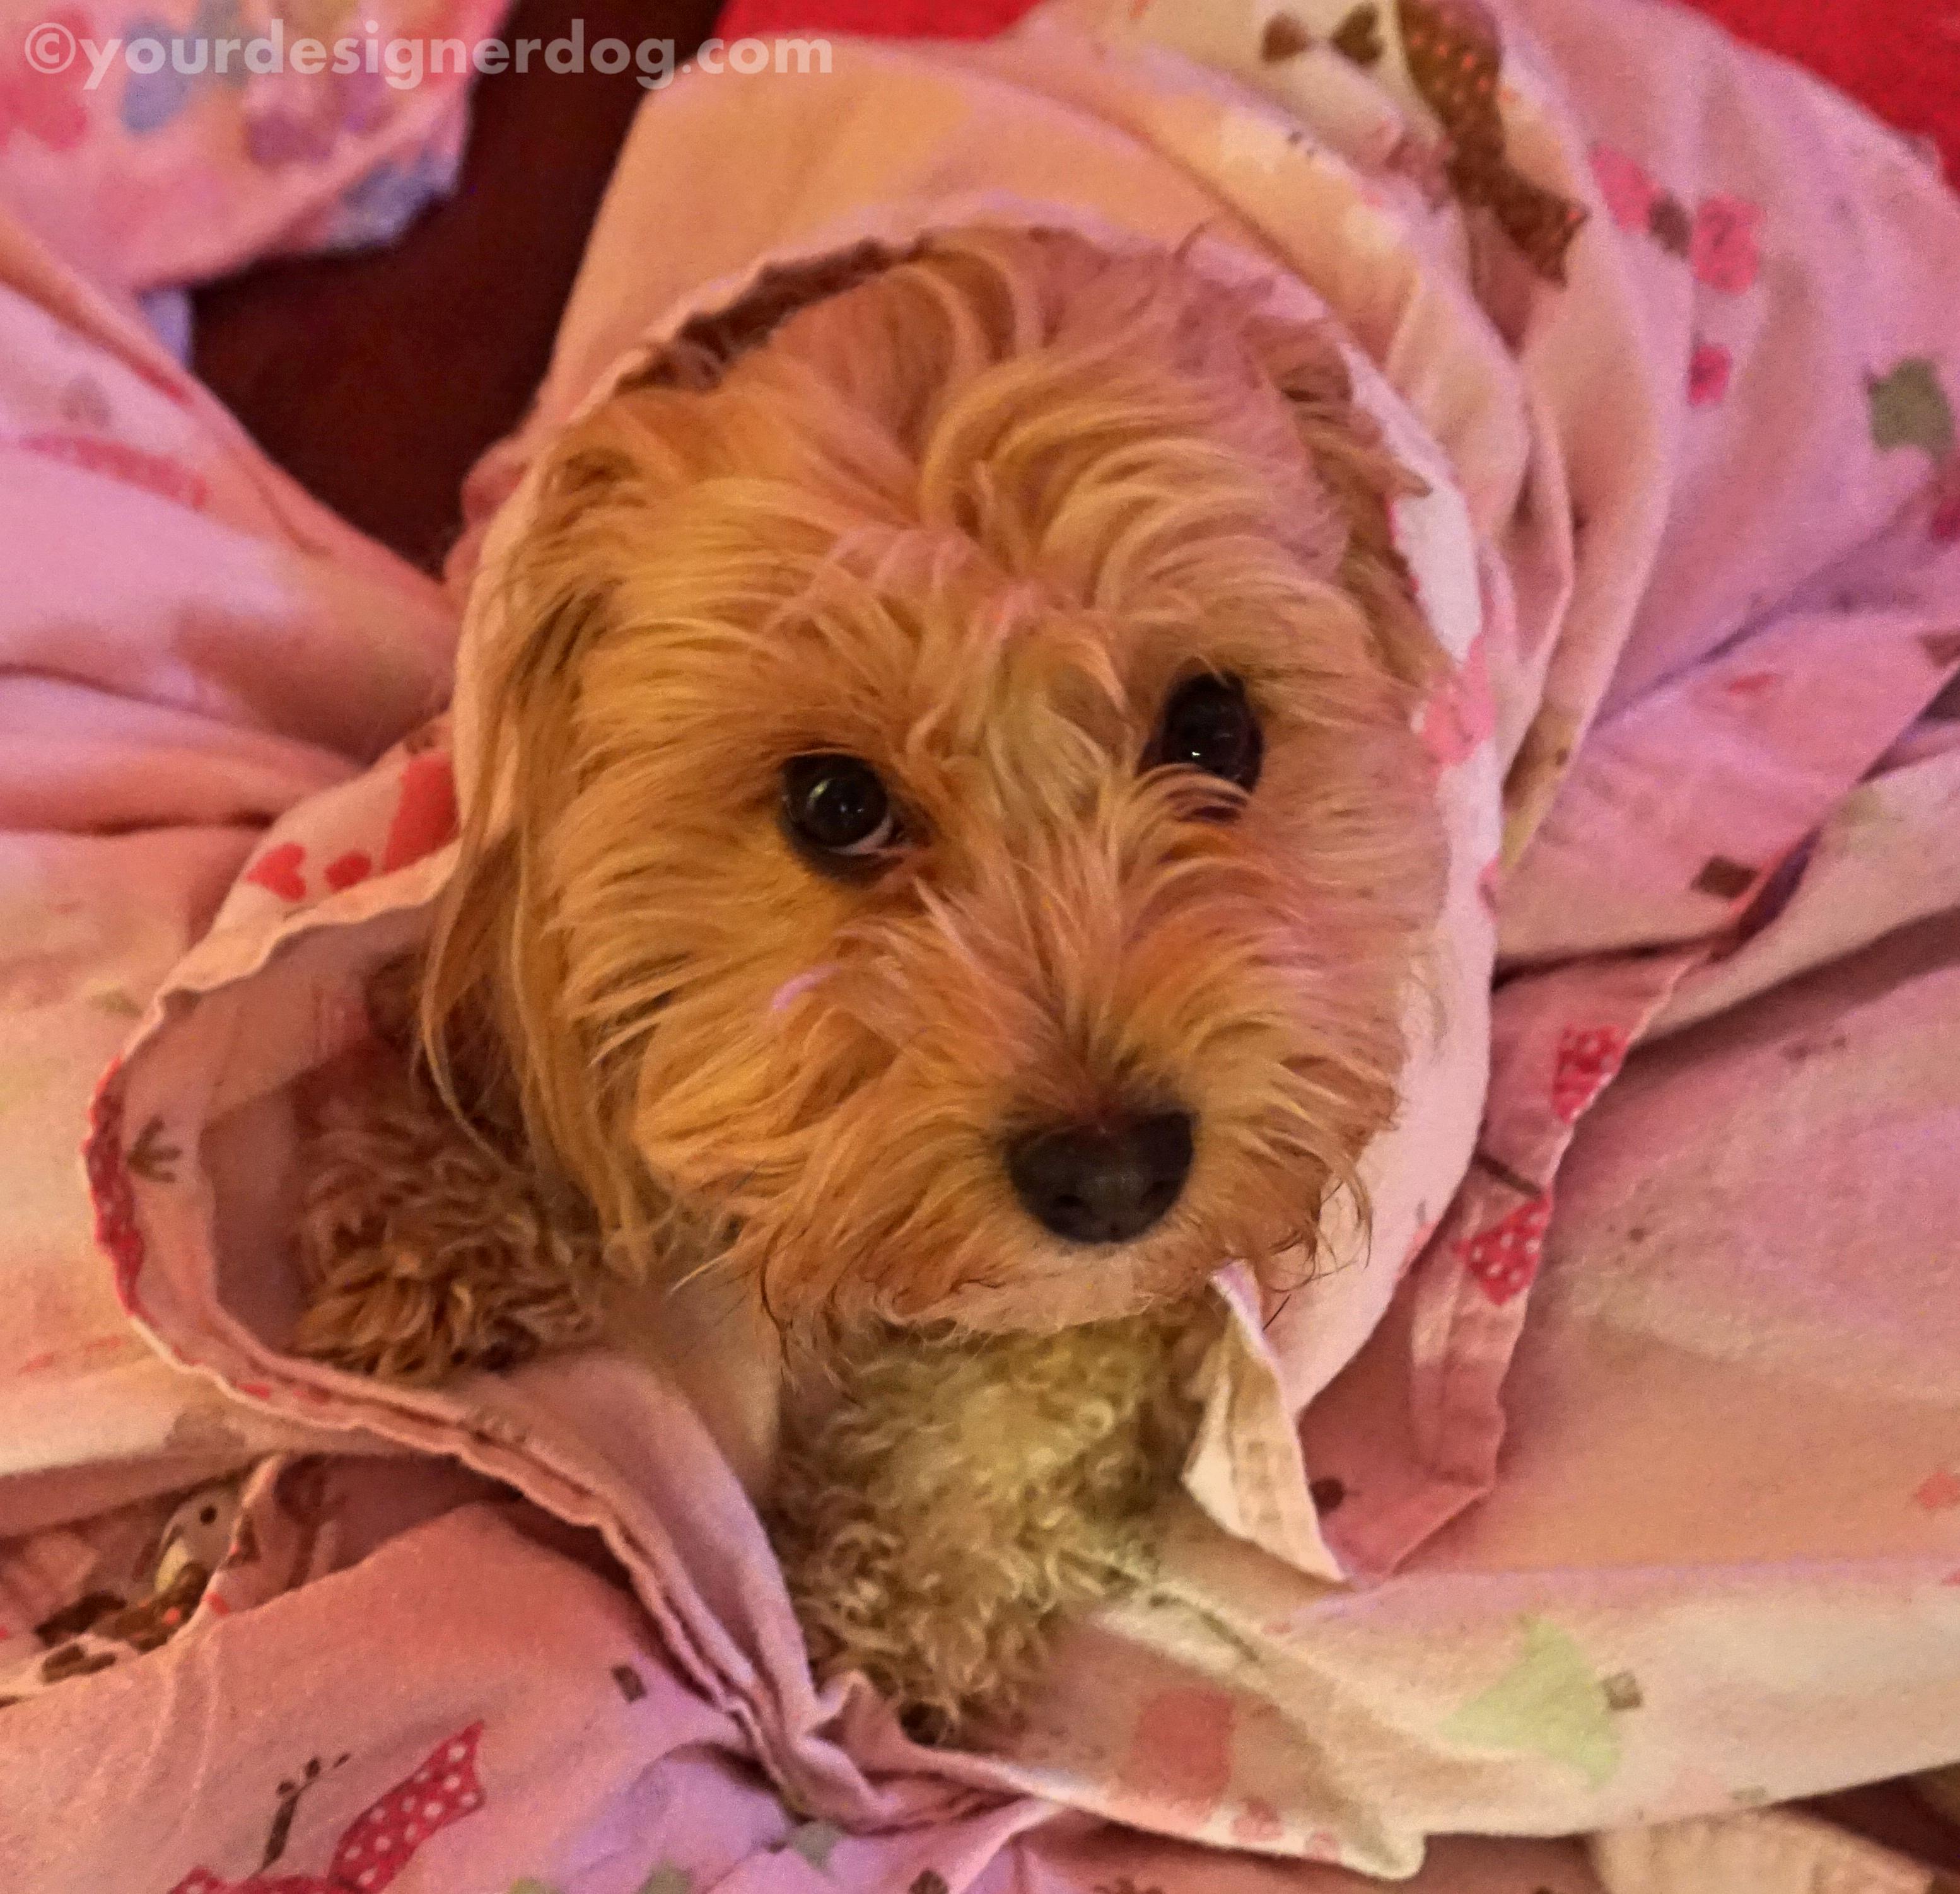 dogs, designer dogs, yorkipoo, yorkie poo, sheets, bed, sleepy puppy, chores, cleaning, mischief